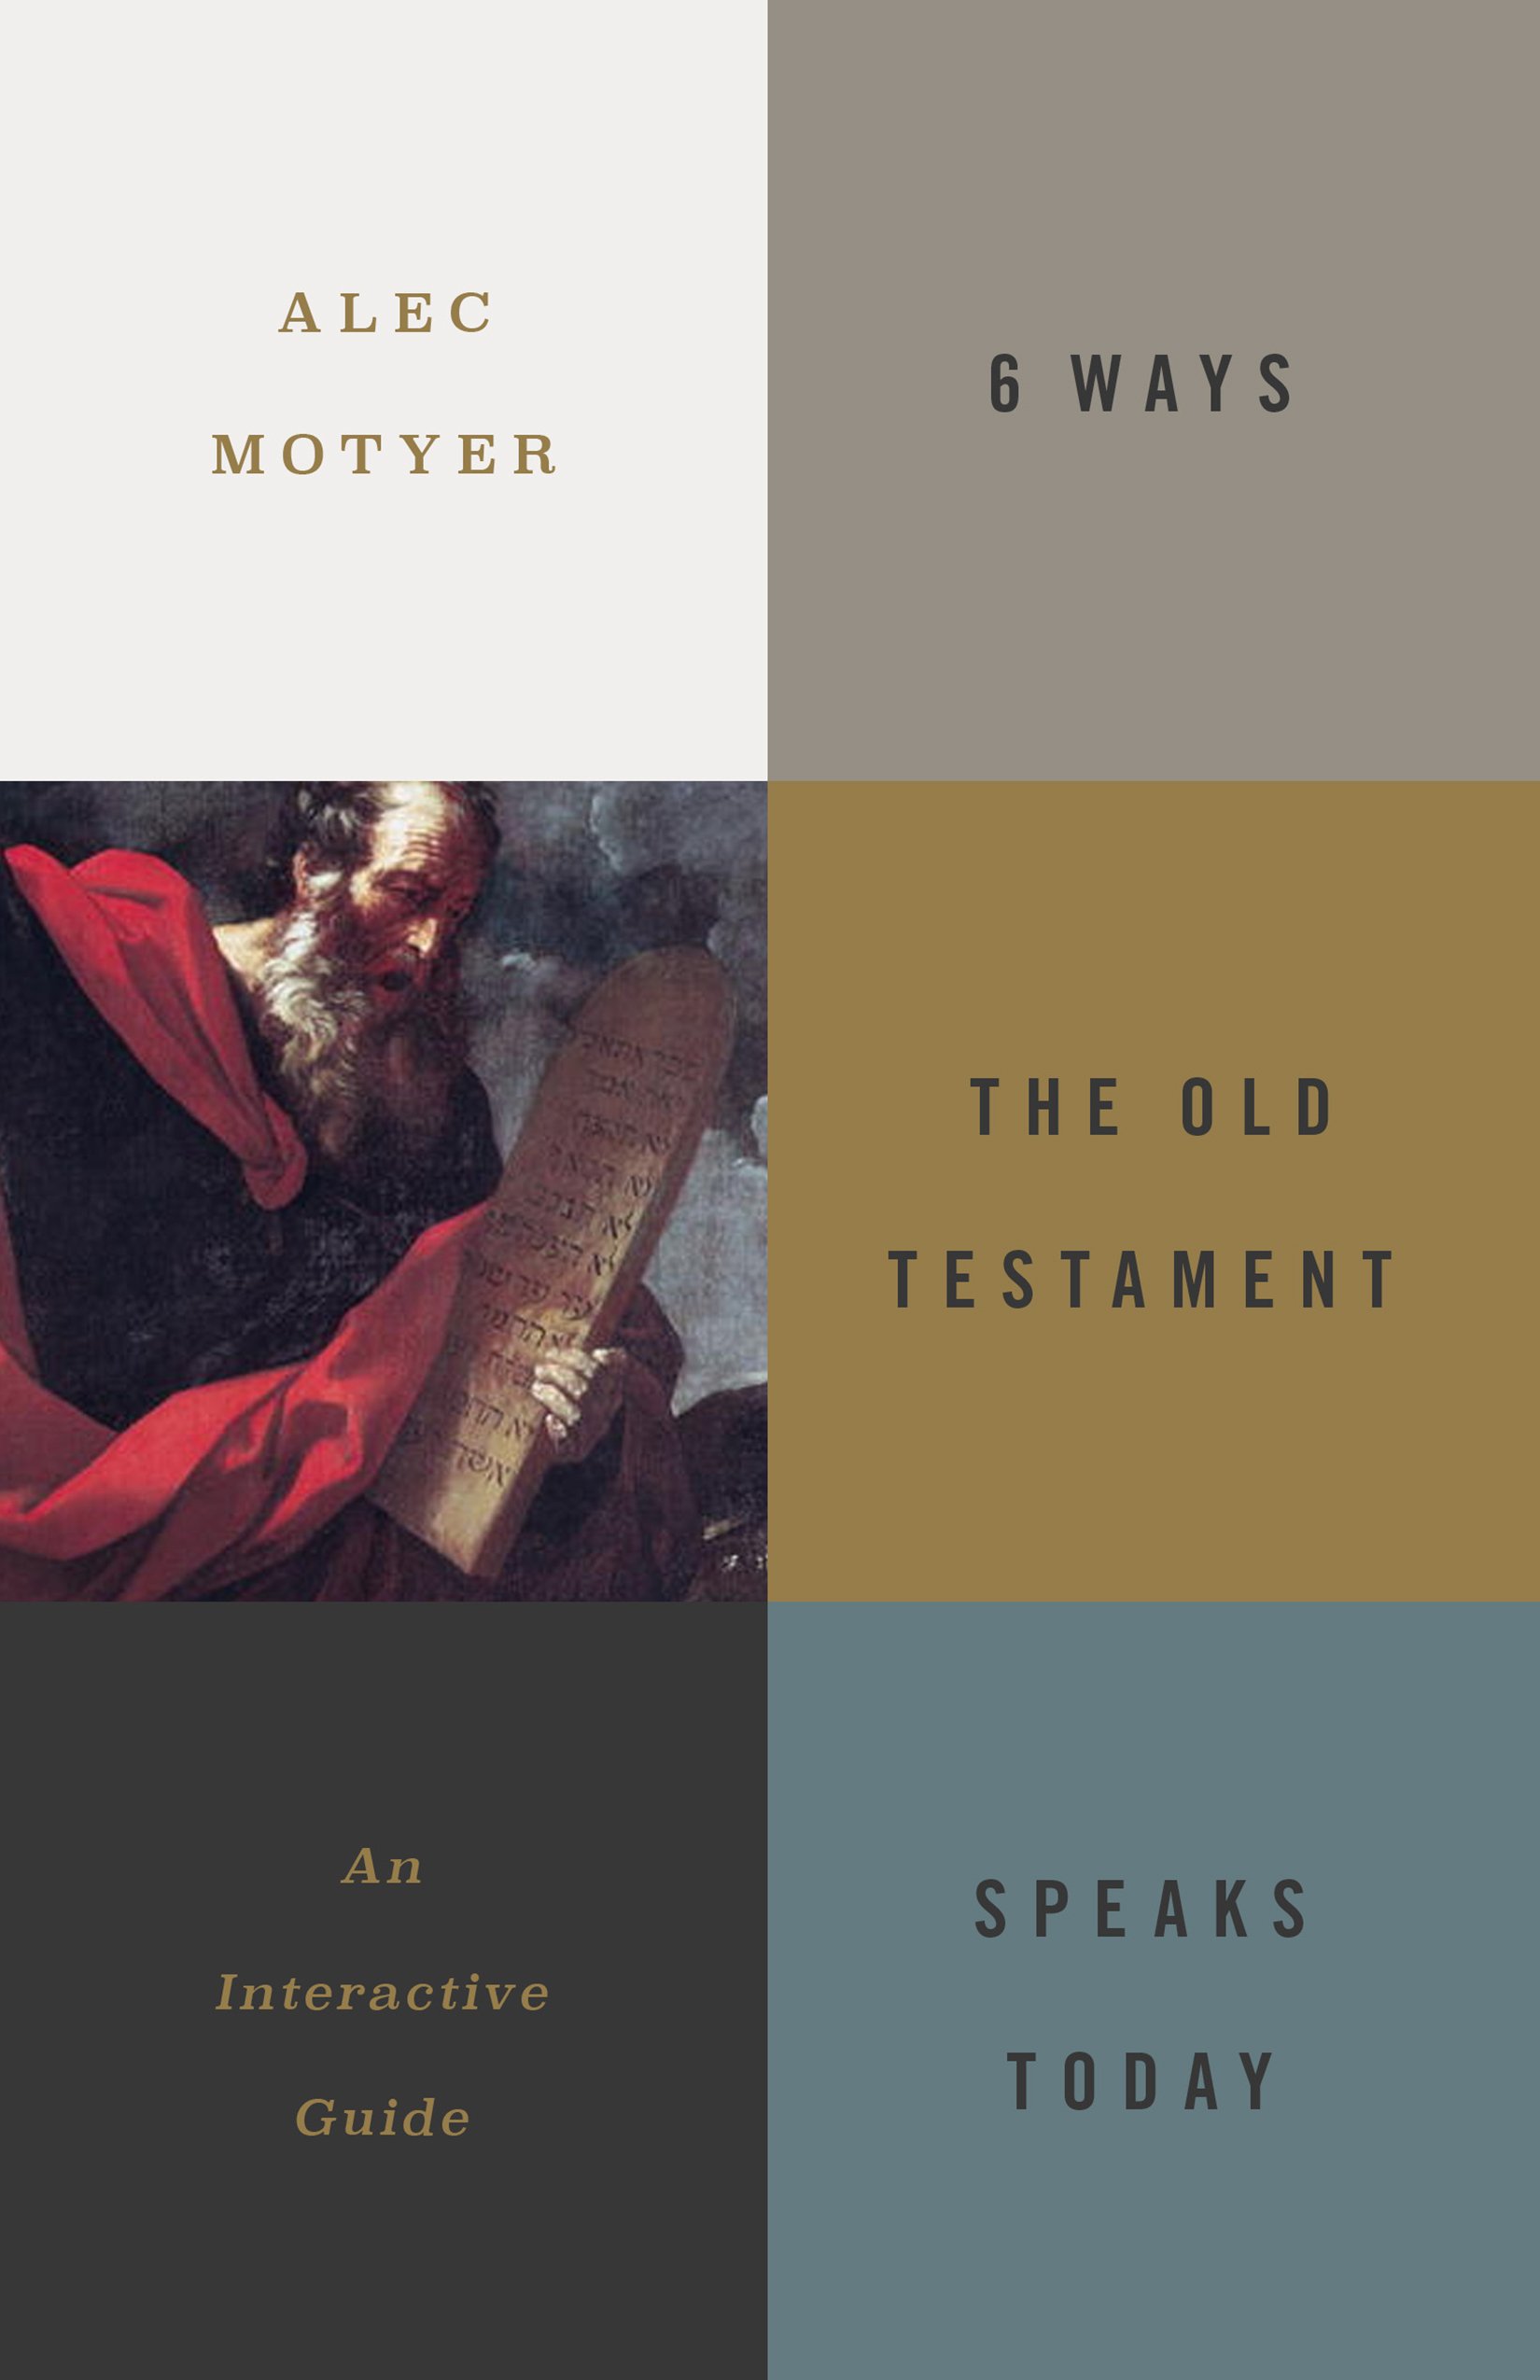 Book Notice: 6 WAYS THE OLD TESTAMENT SPEAKS TODAY: AN INTERACTIVE GUIDE, by Alec Motyer